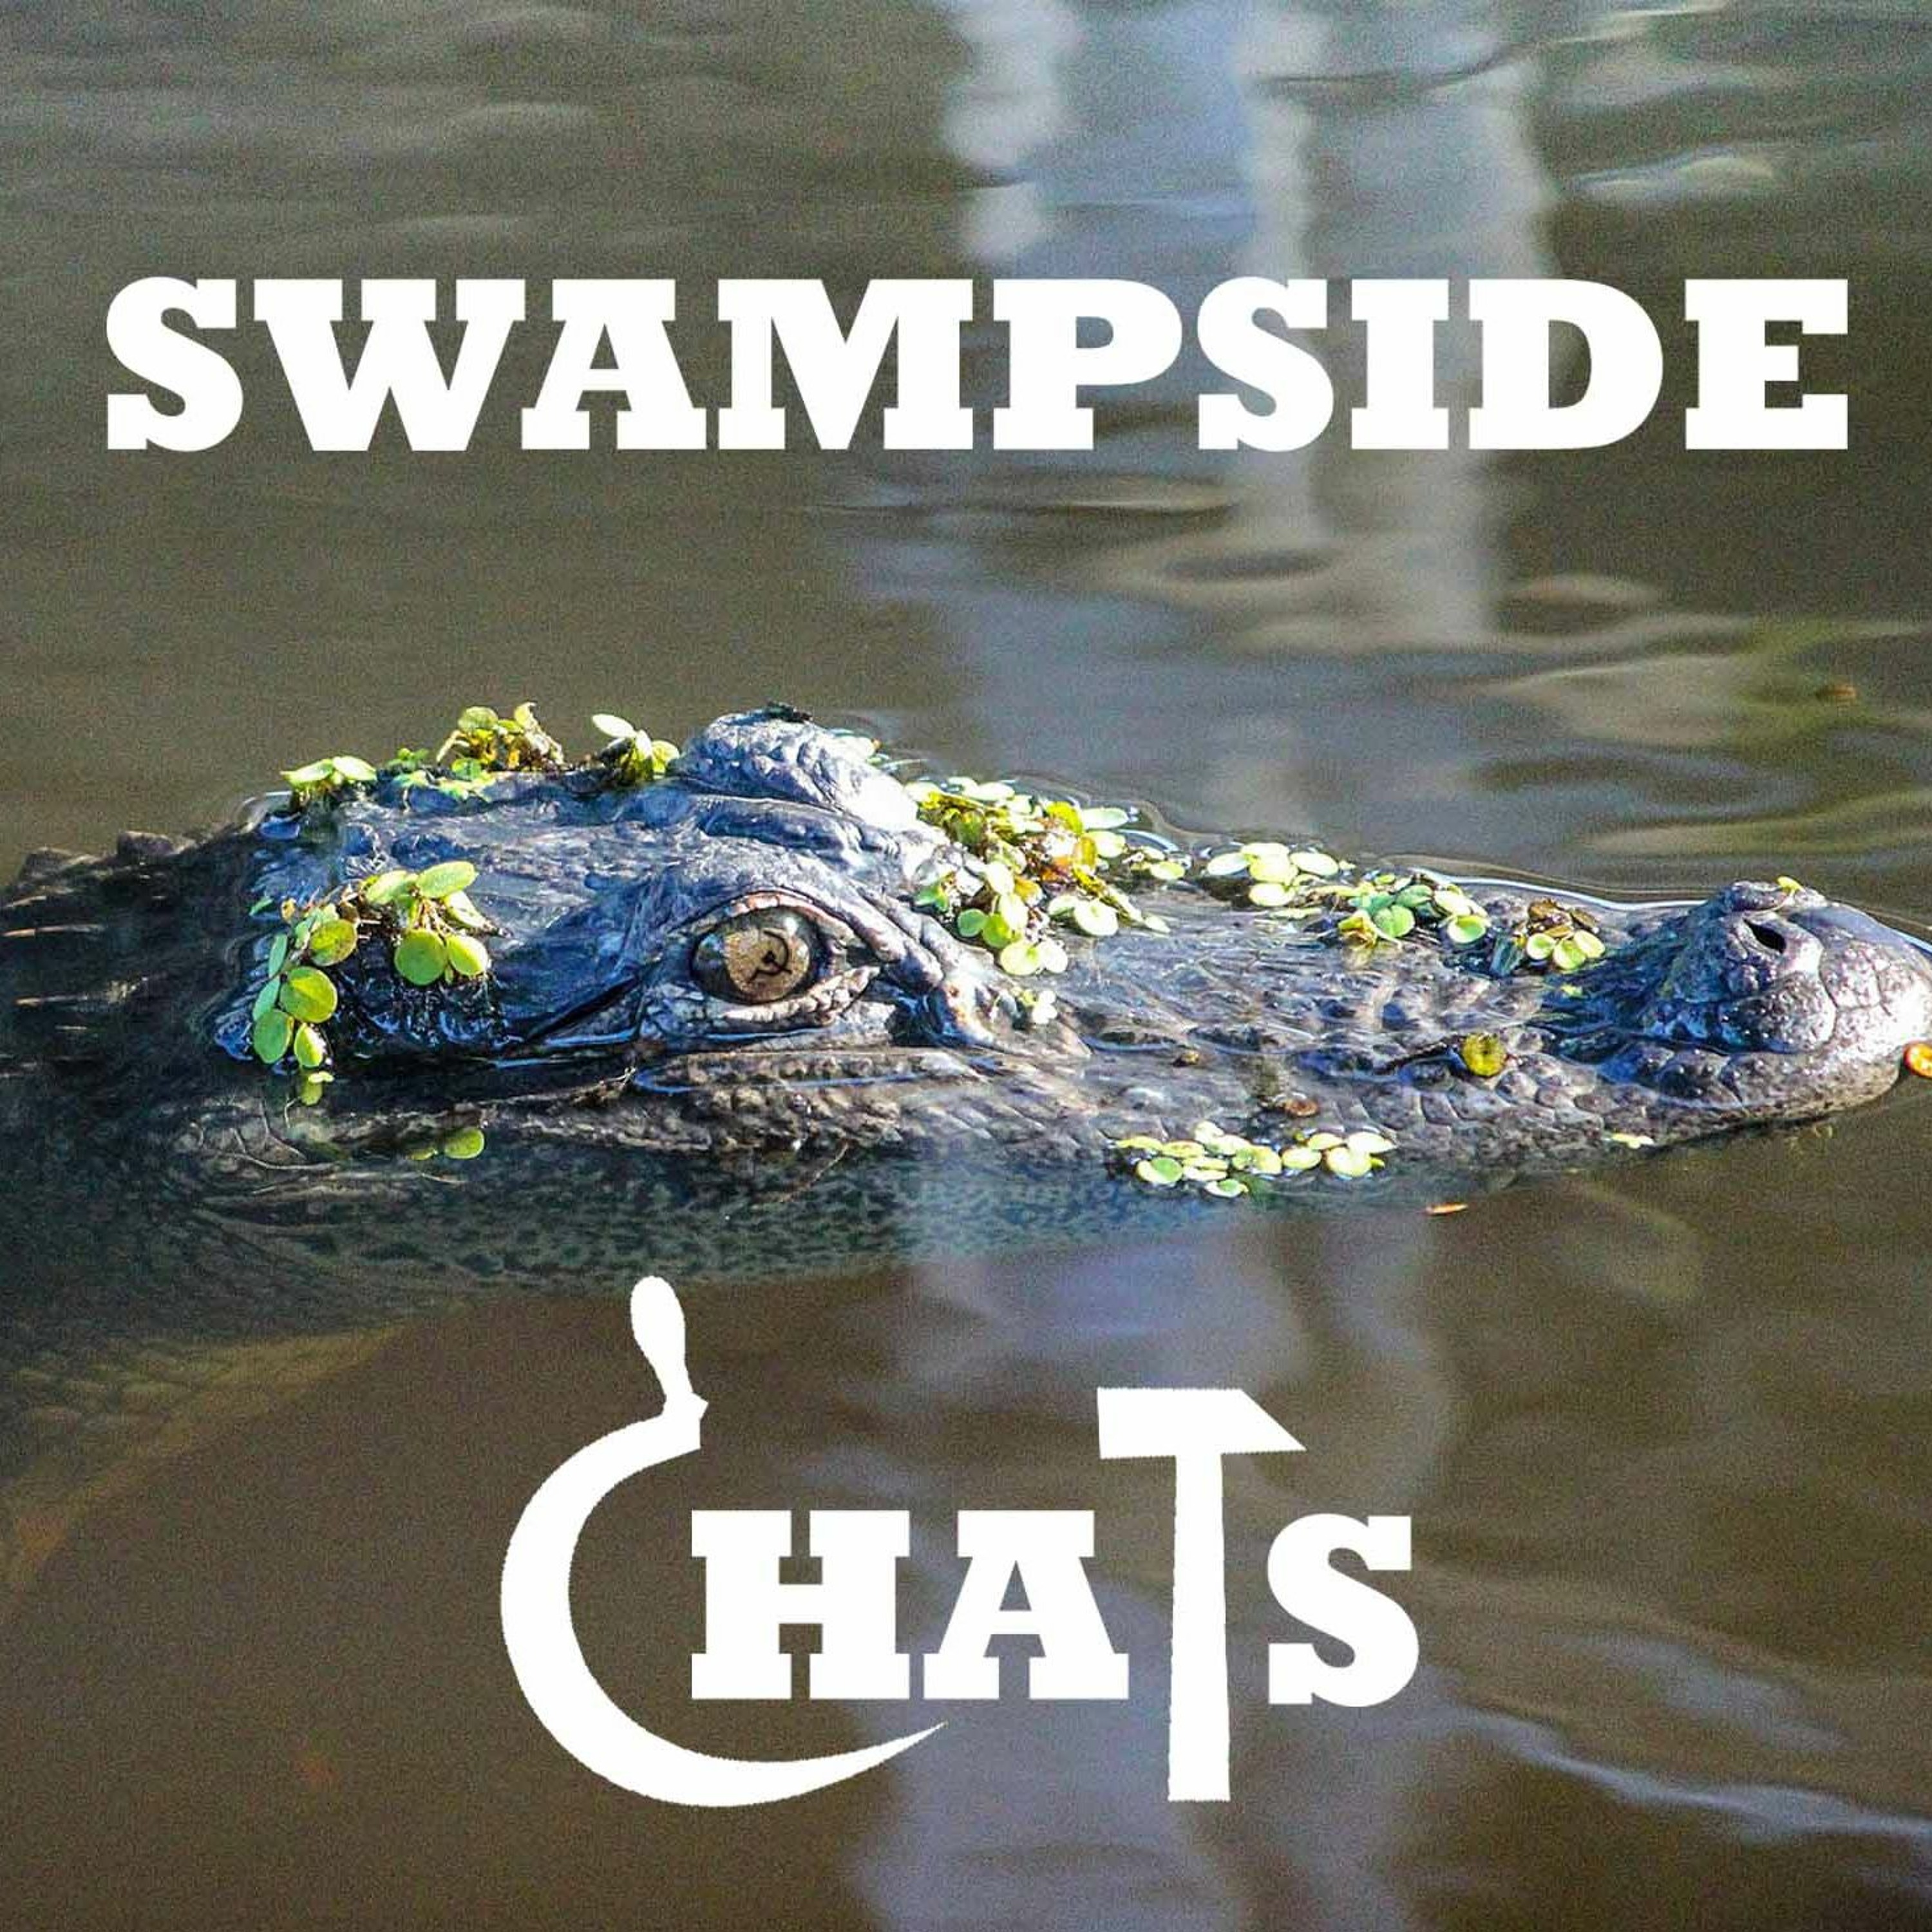 #85 - ”The Swamp” Revisited